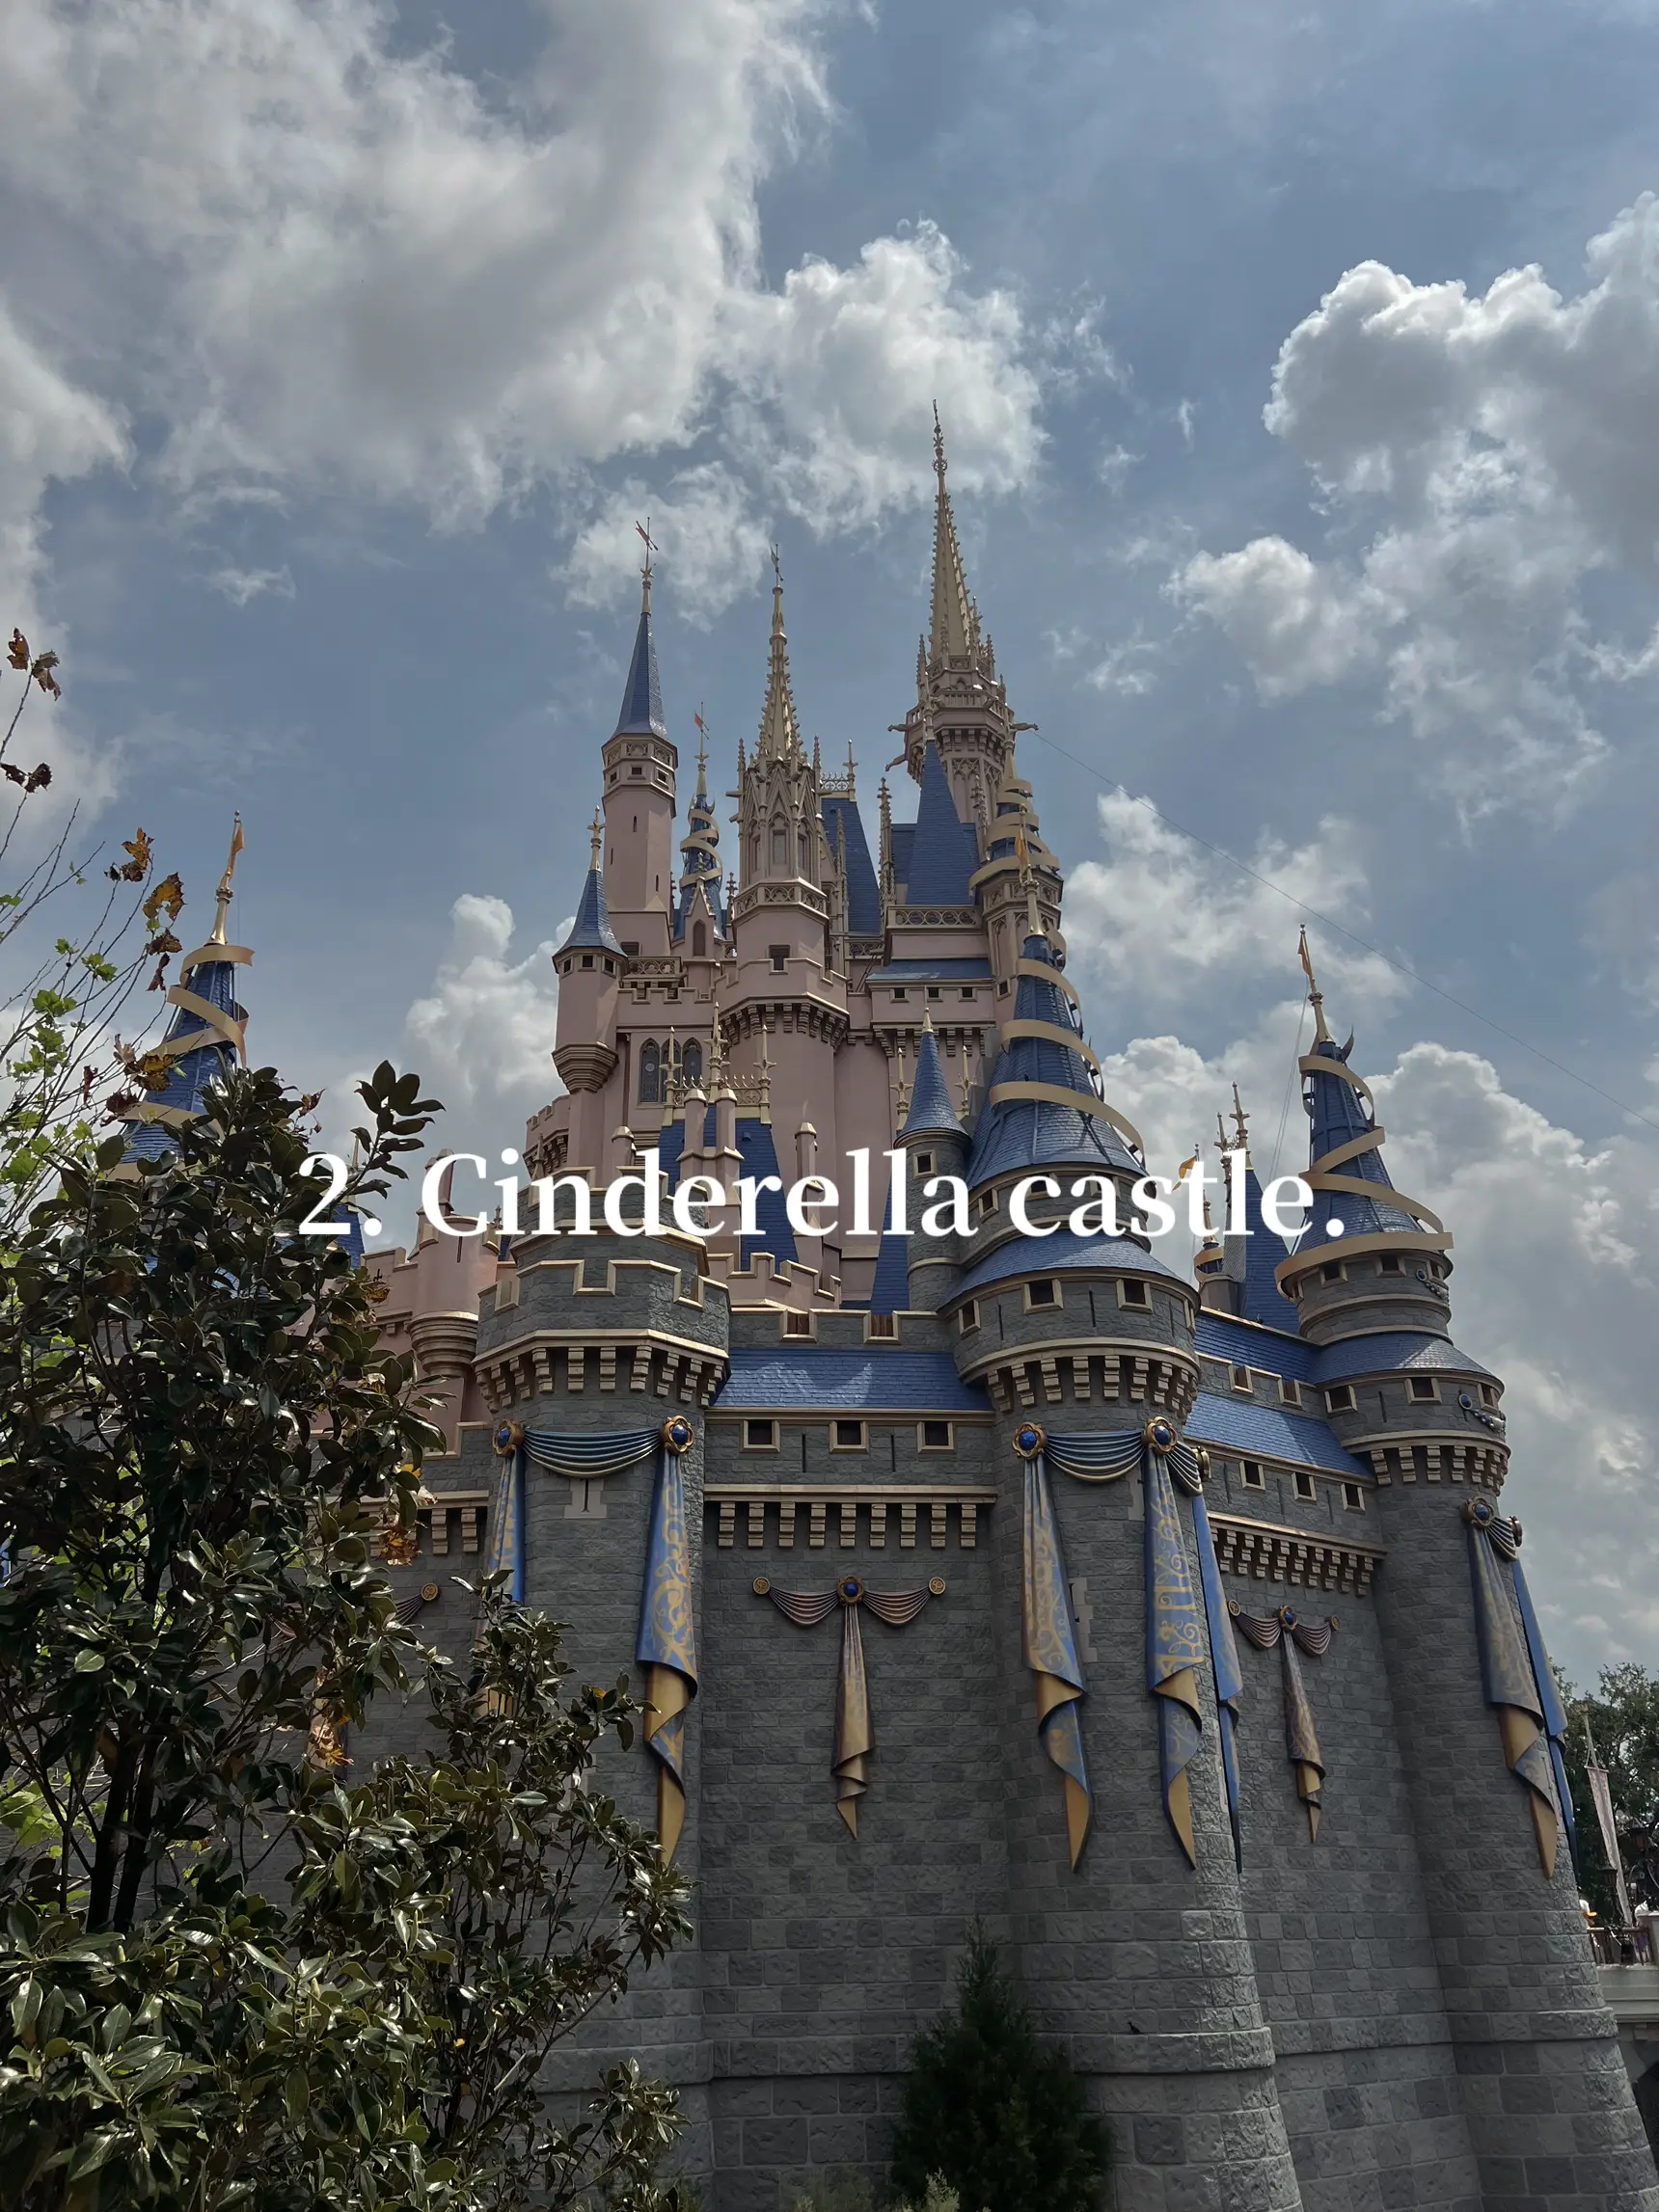  The image of a castle is labeled with the words "Cinderella castle".